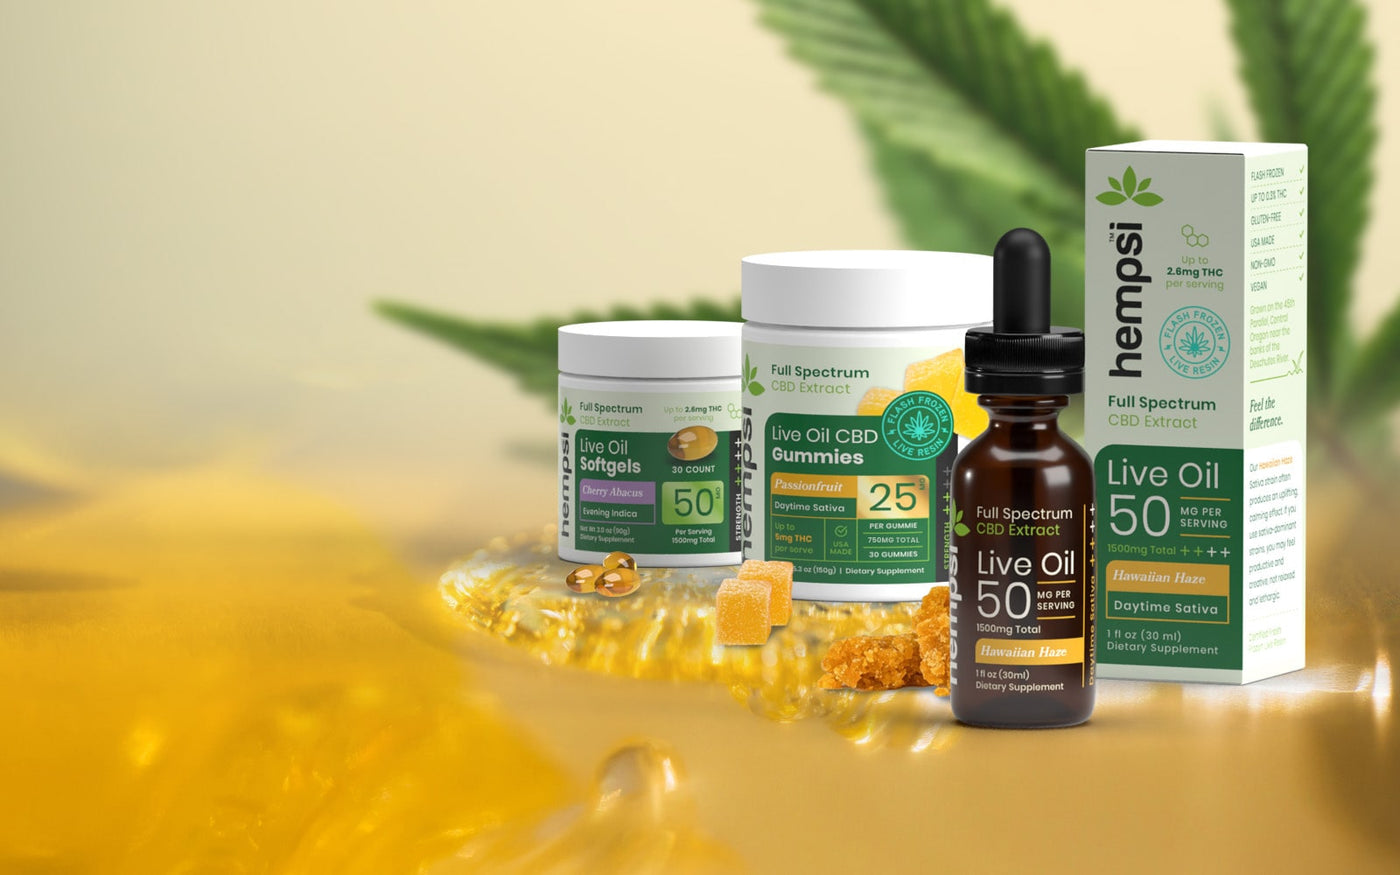 Premium Full Spectrum Flash Frozen Live Oil CBD + THC Extract products contain the full benefits of the hemp plant. With Hempsi Live Resin CBD products you will feel the difference.